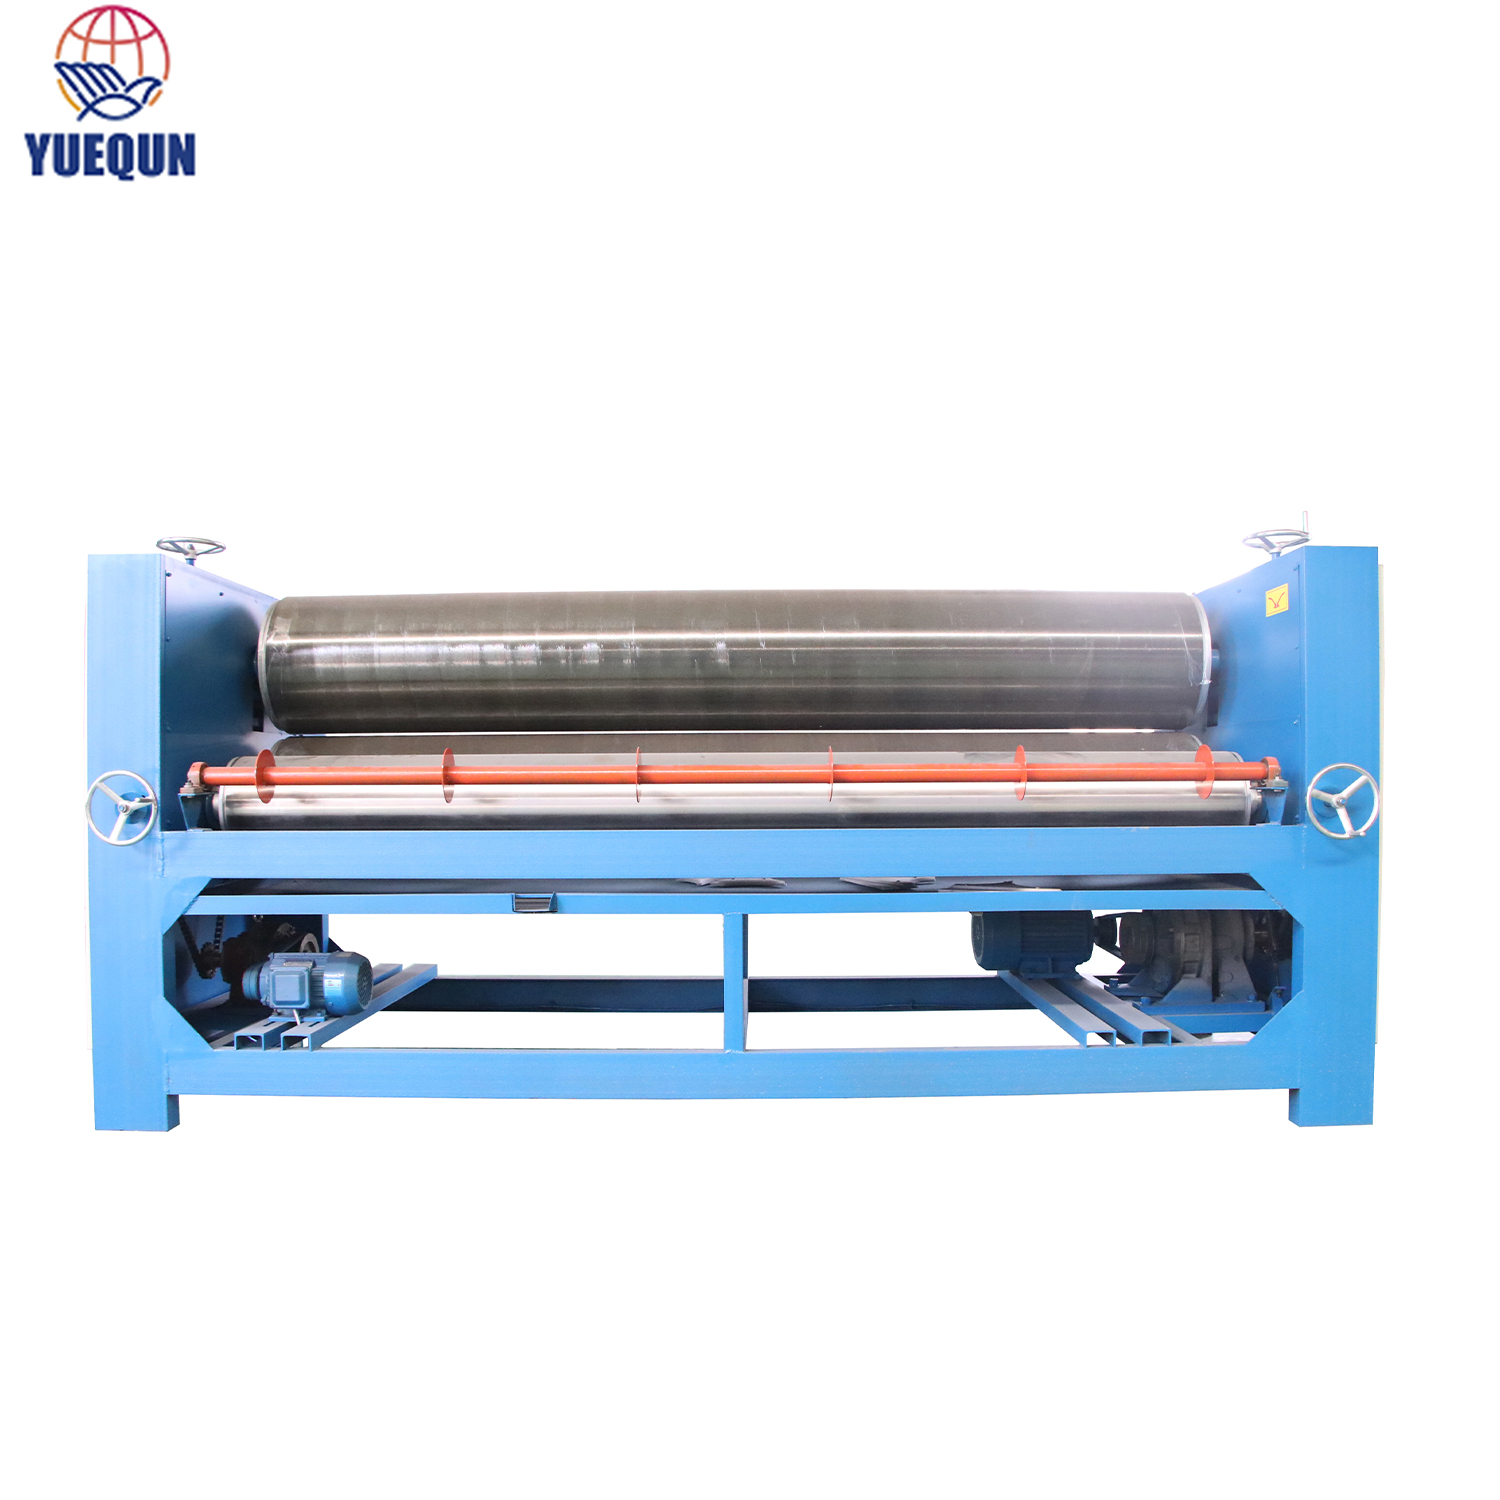 Glue spreader machine for plywood industry